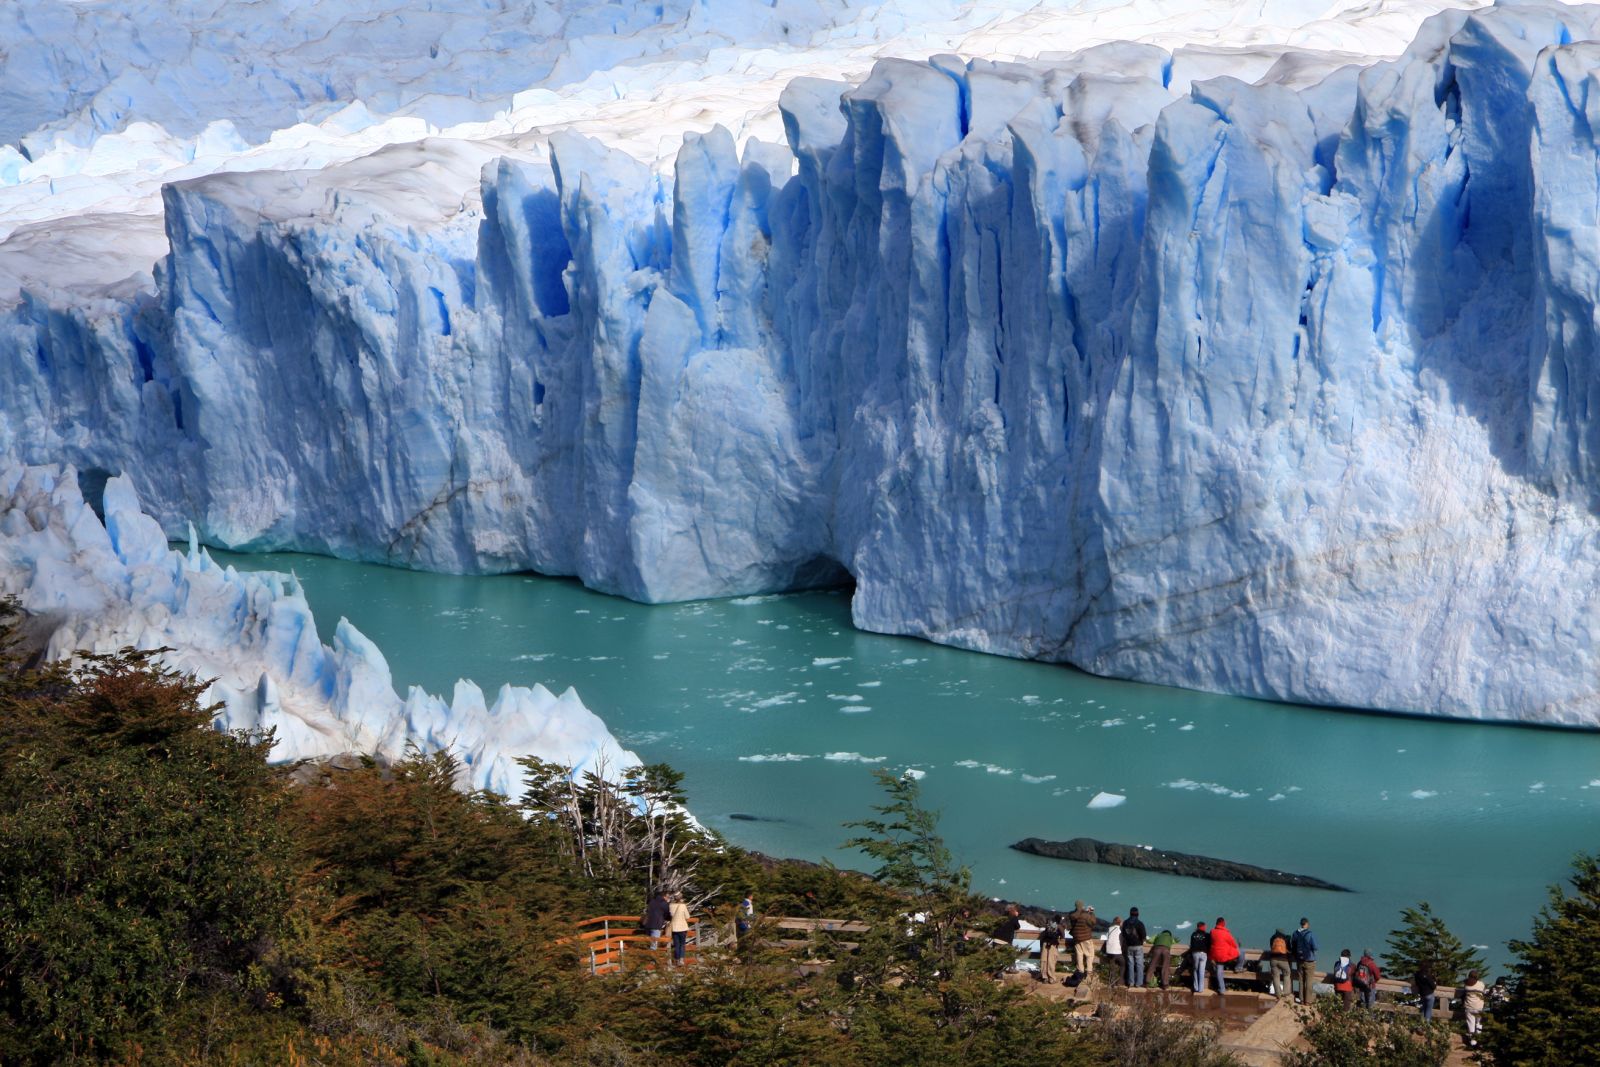 Visitors observing the face of the Perito Moreno glacier in Argentinian Patagonia